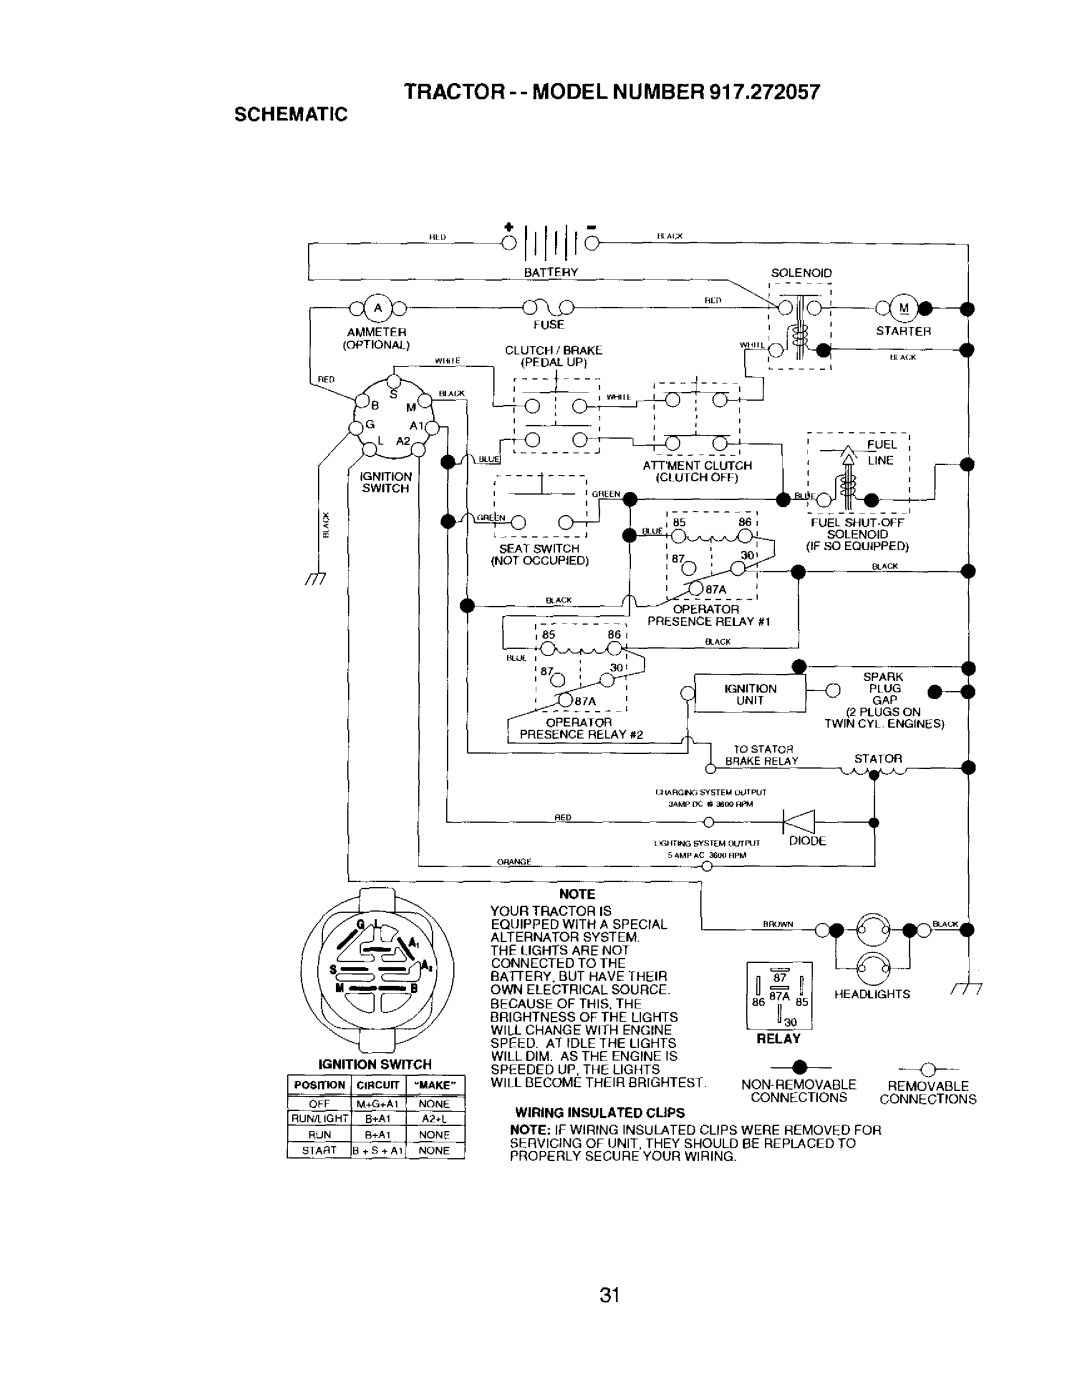 Craftsman 917.272057 Tractor --Model Number Schematic, Battery, Solenoid, Ammeter, Fuse, Starter, OPTIONAL WHdlE, Relay 